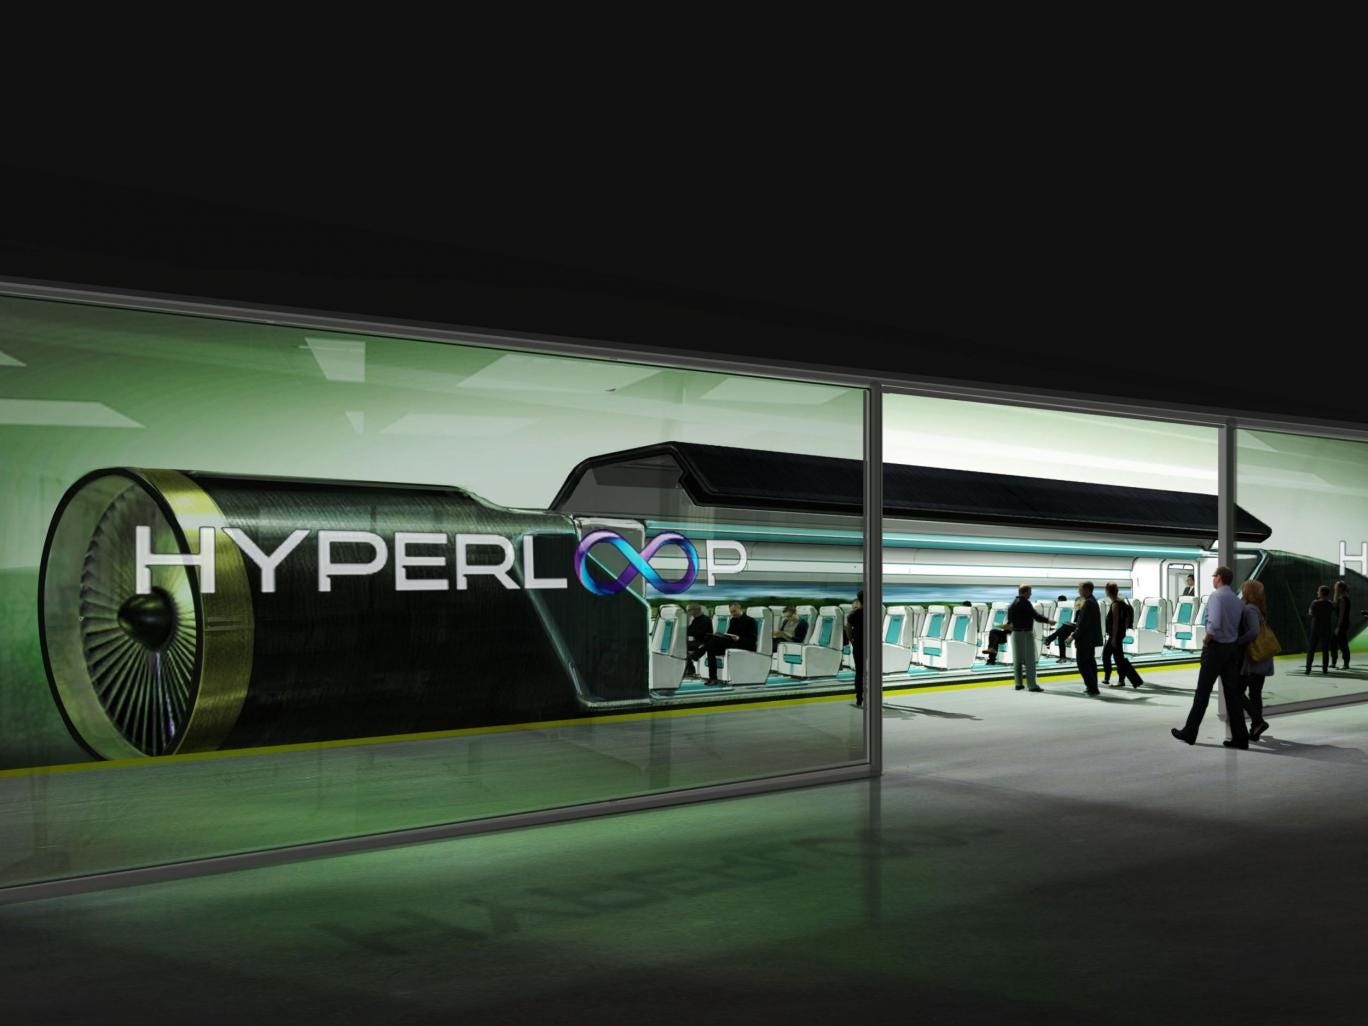 A concept design of a Hyperloop station created by Hyperloop Technologies, one of the pioneering companies working on developing the system